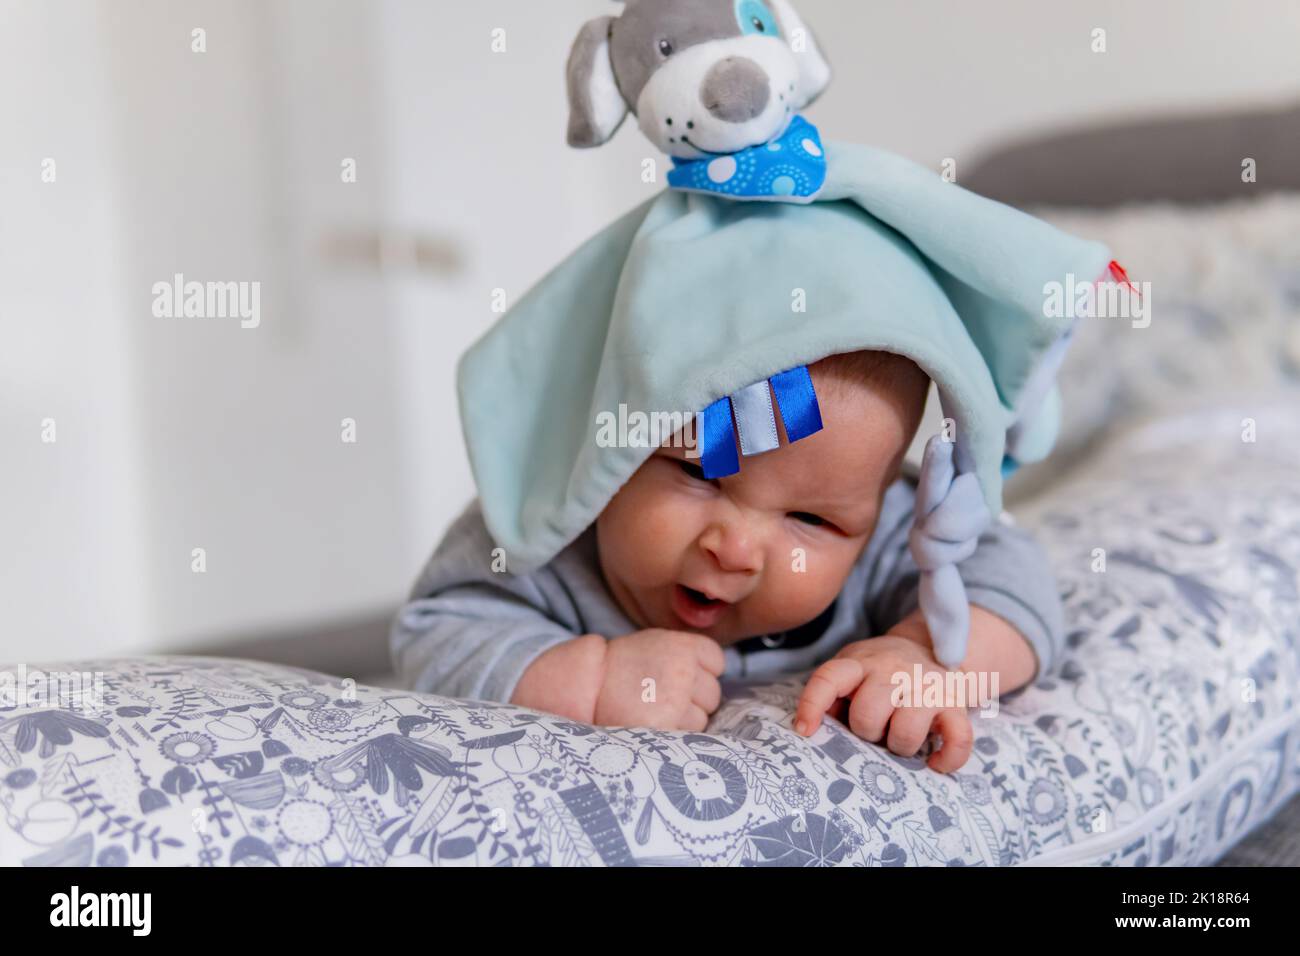 sleepy baby yawns on the pillow with a toy cap on his head Stock Photo